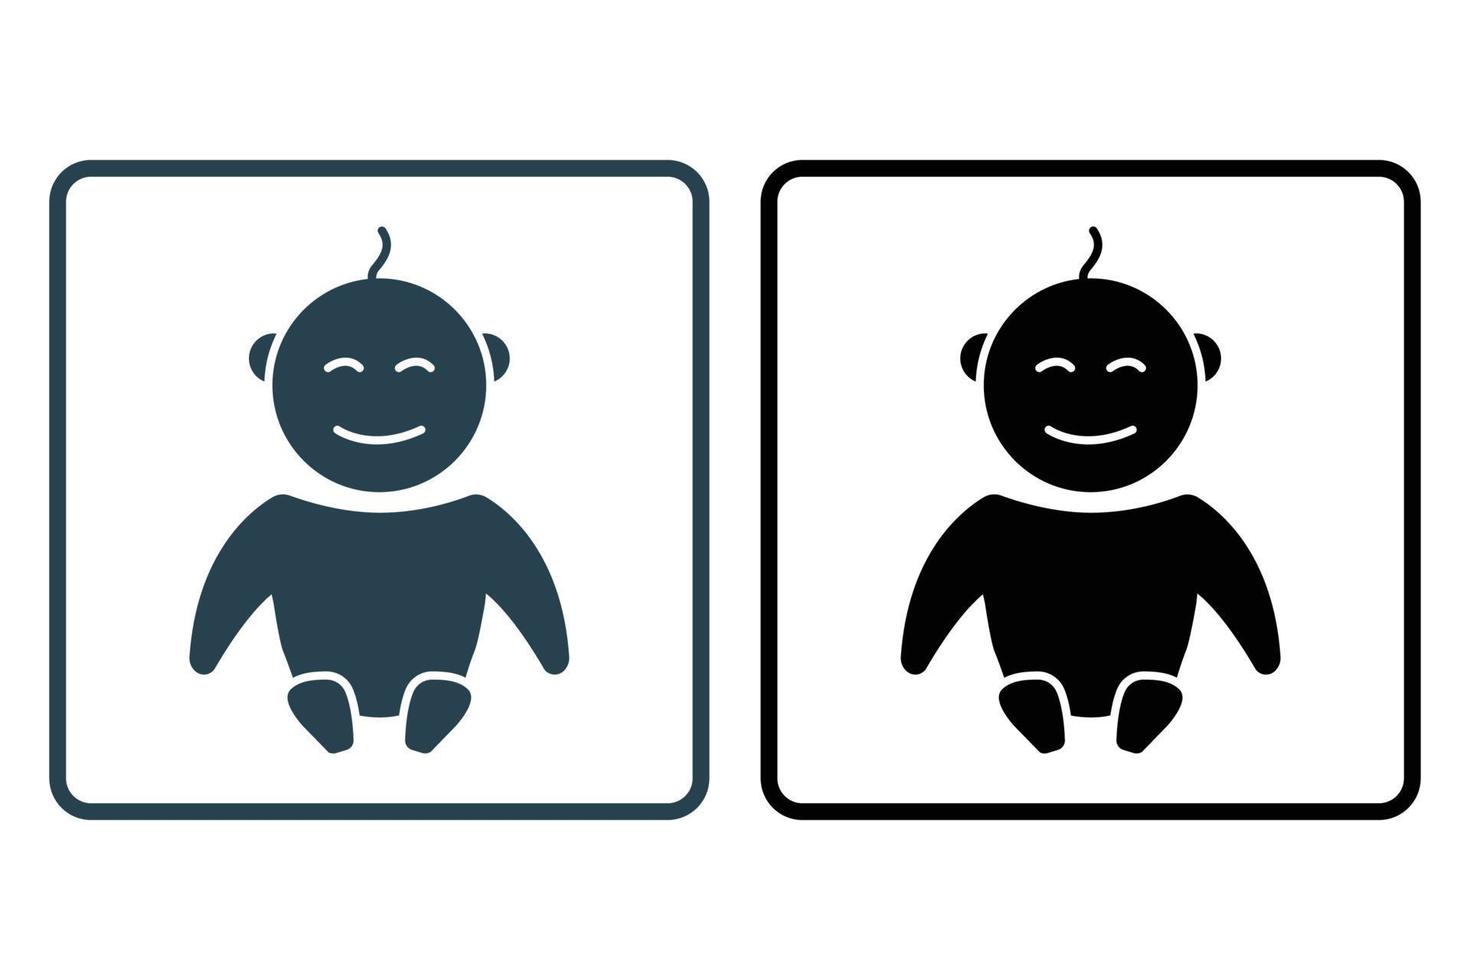 Baby icon illustration. icon related to baby care. Solid icon style. Simple vector design editable